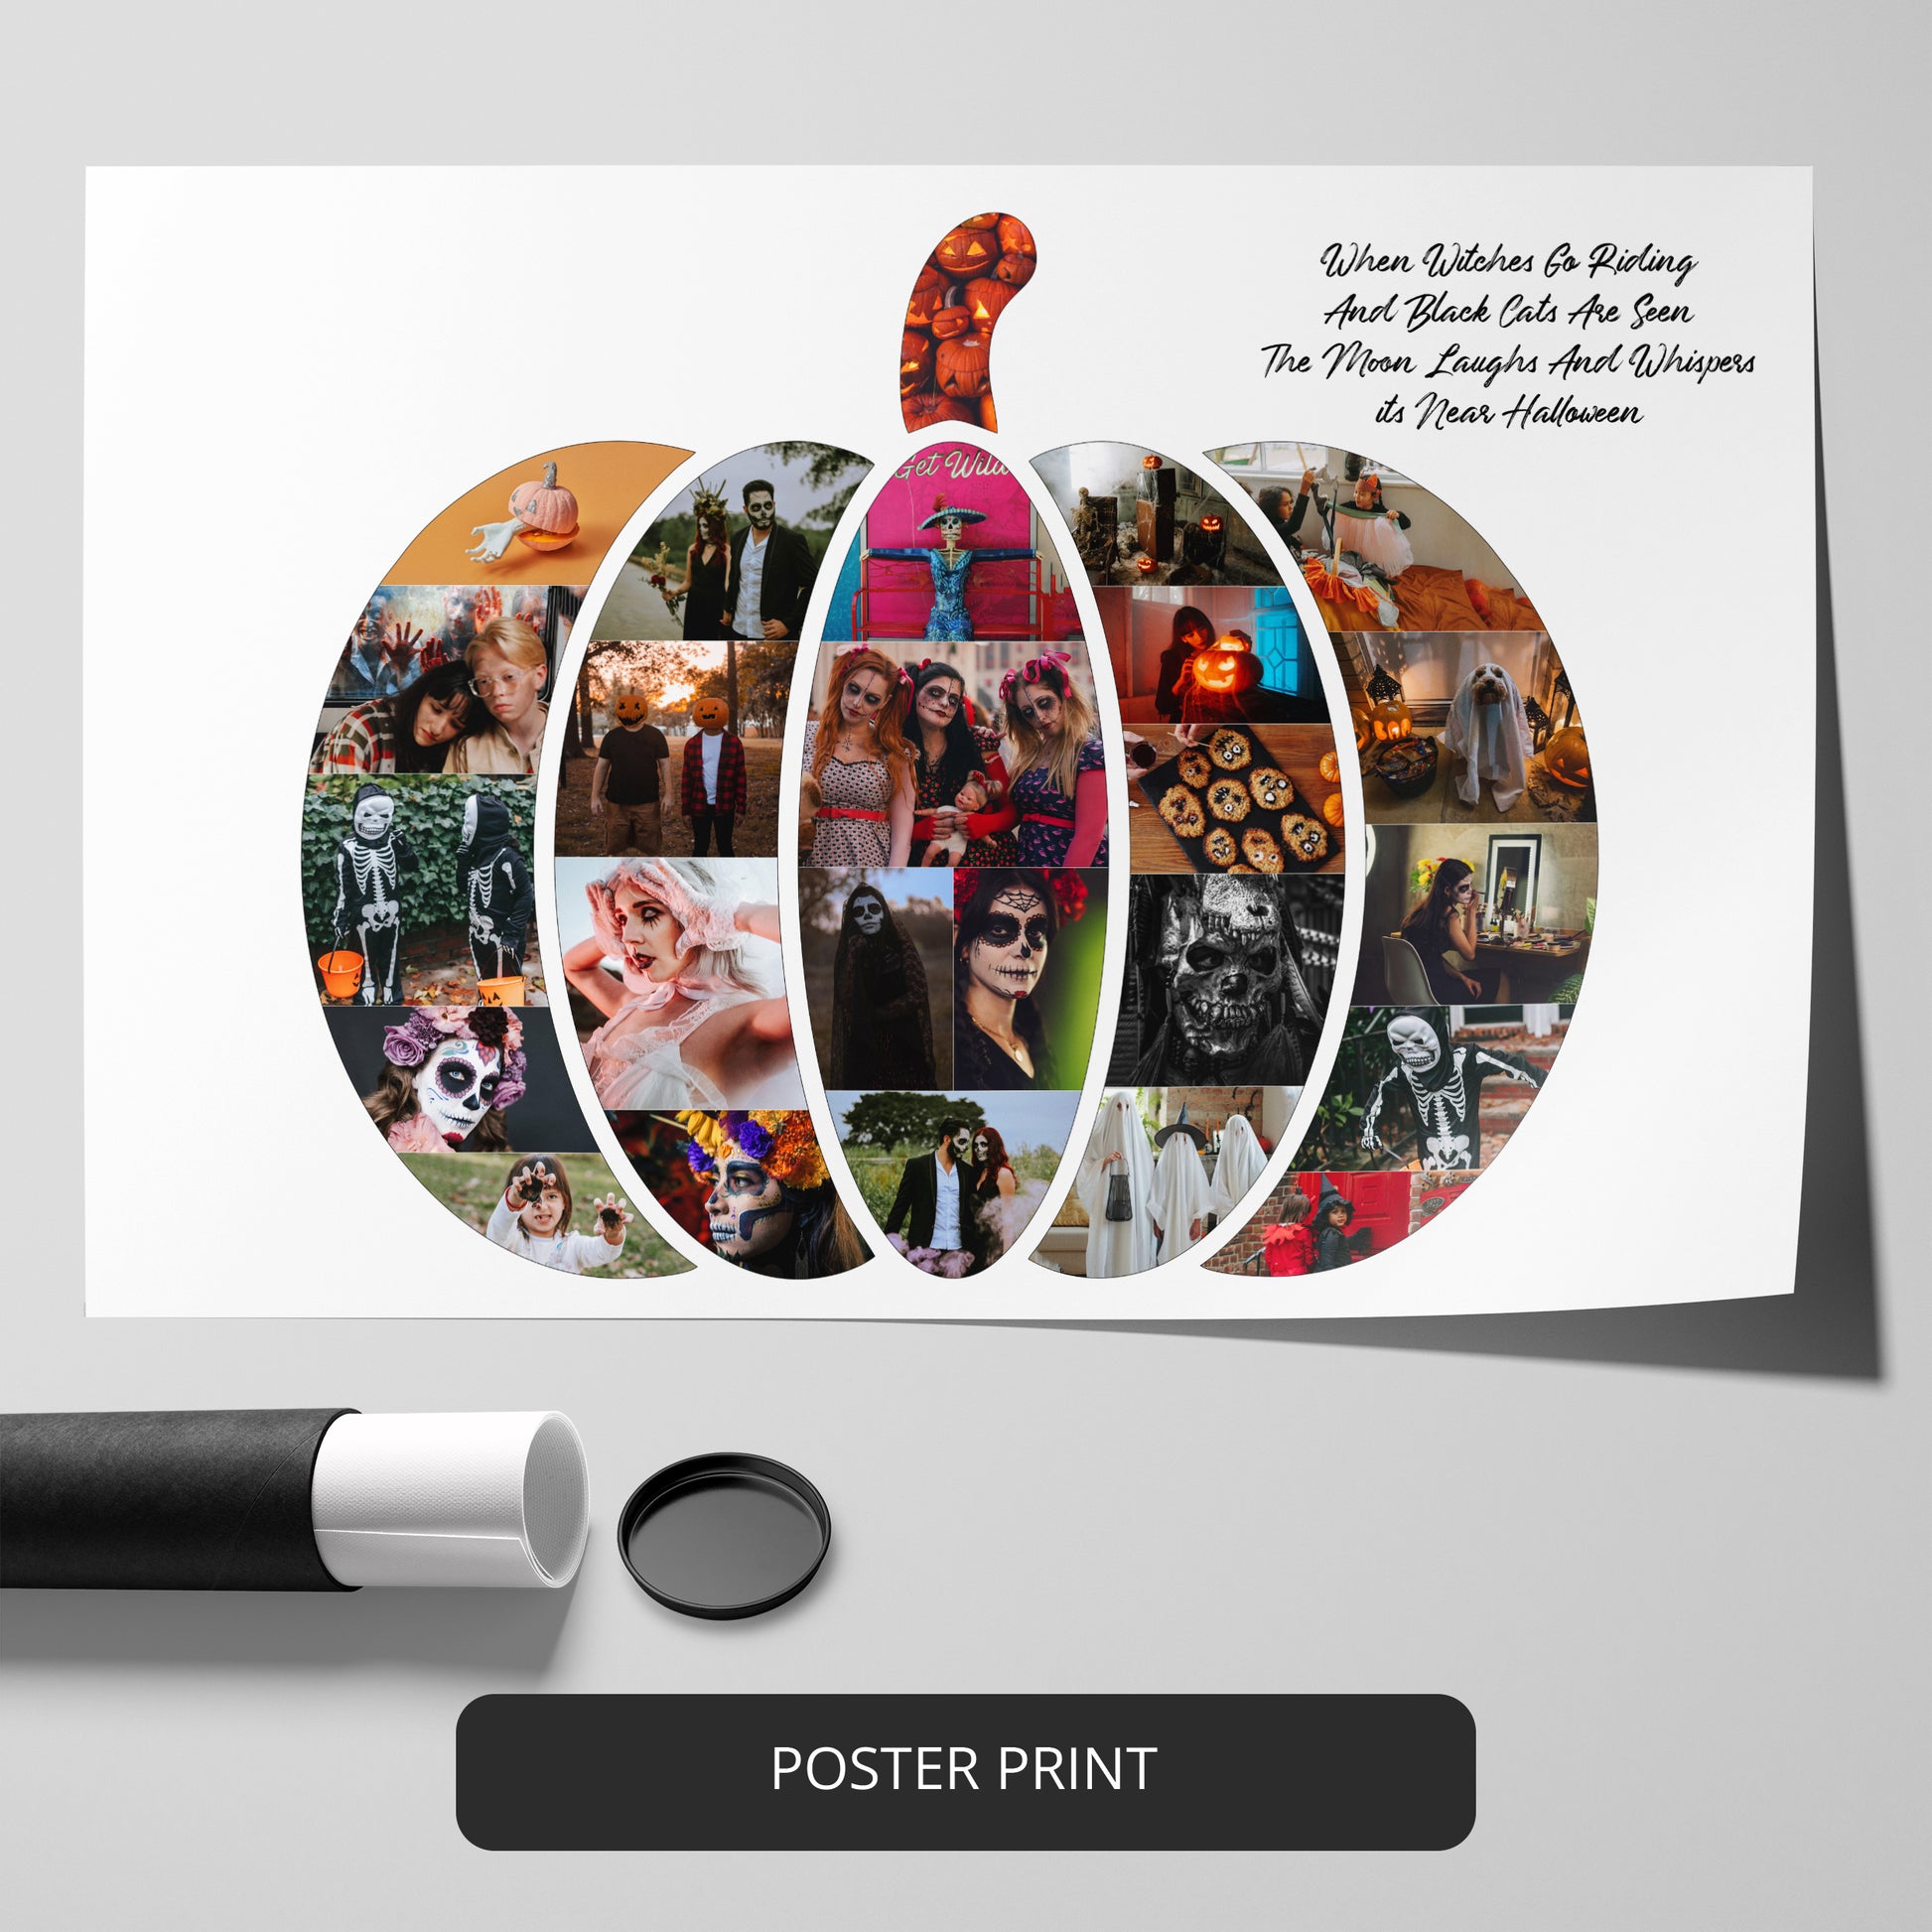 Cute Pumpkin Gifts: Customizable Photo Collage for Halloween